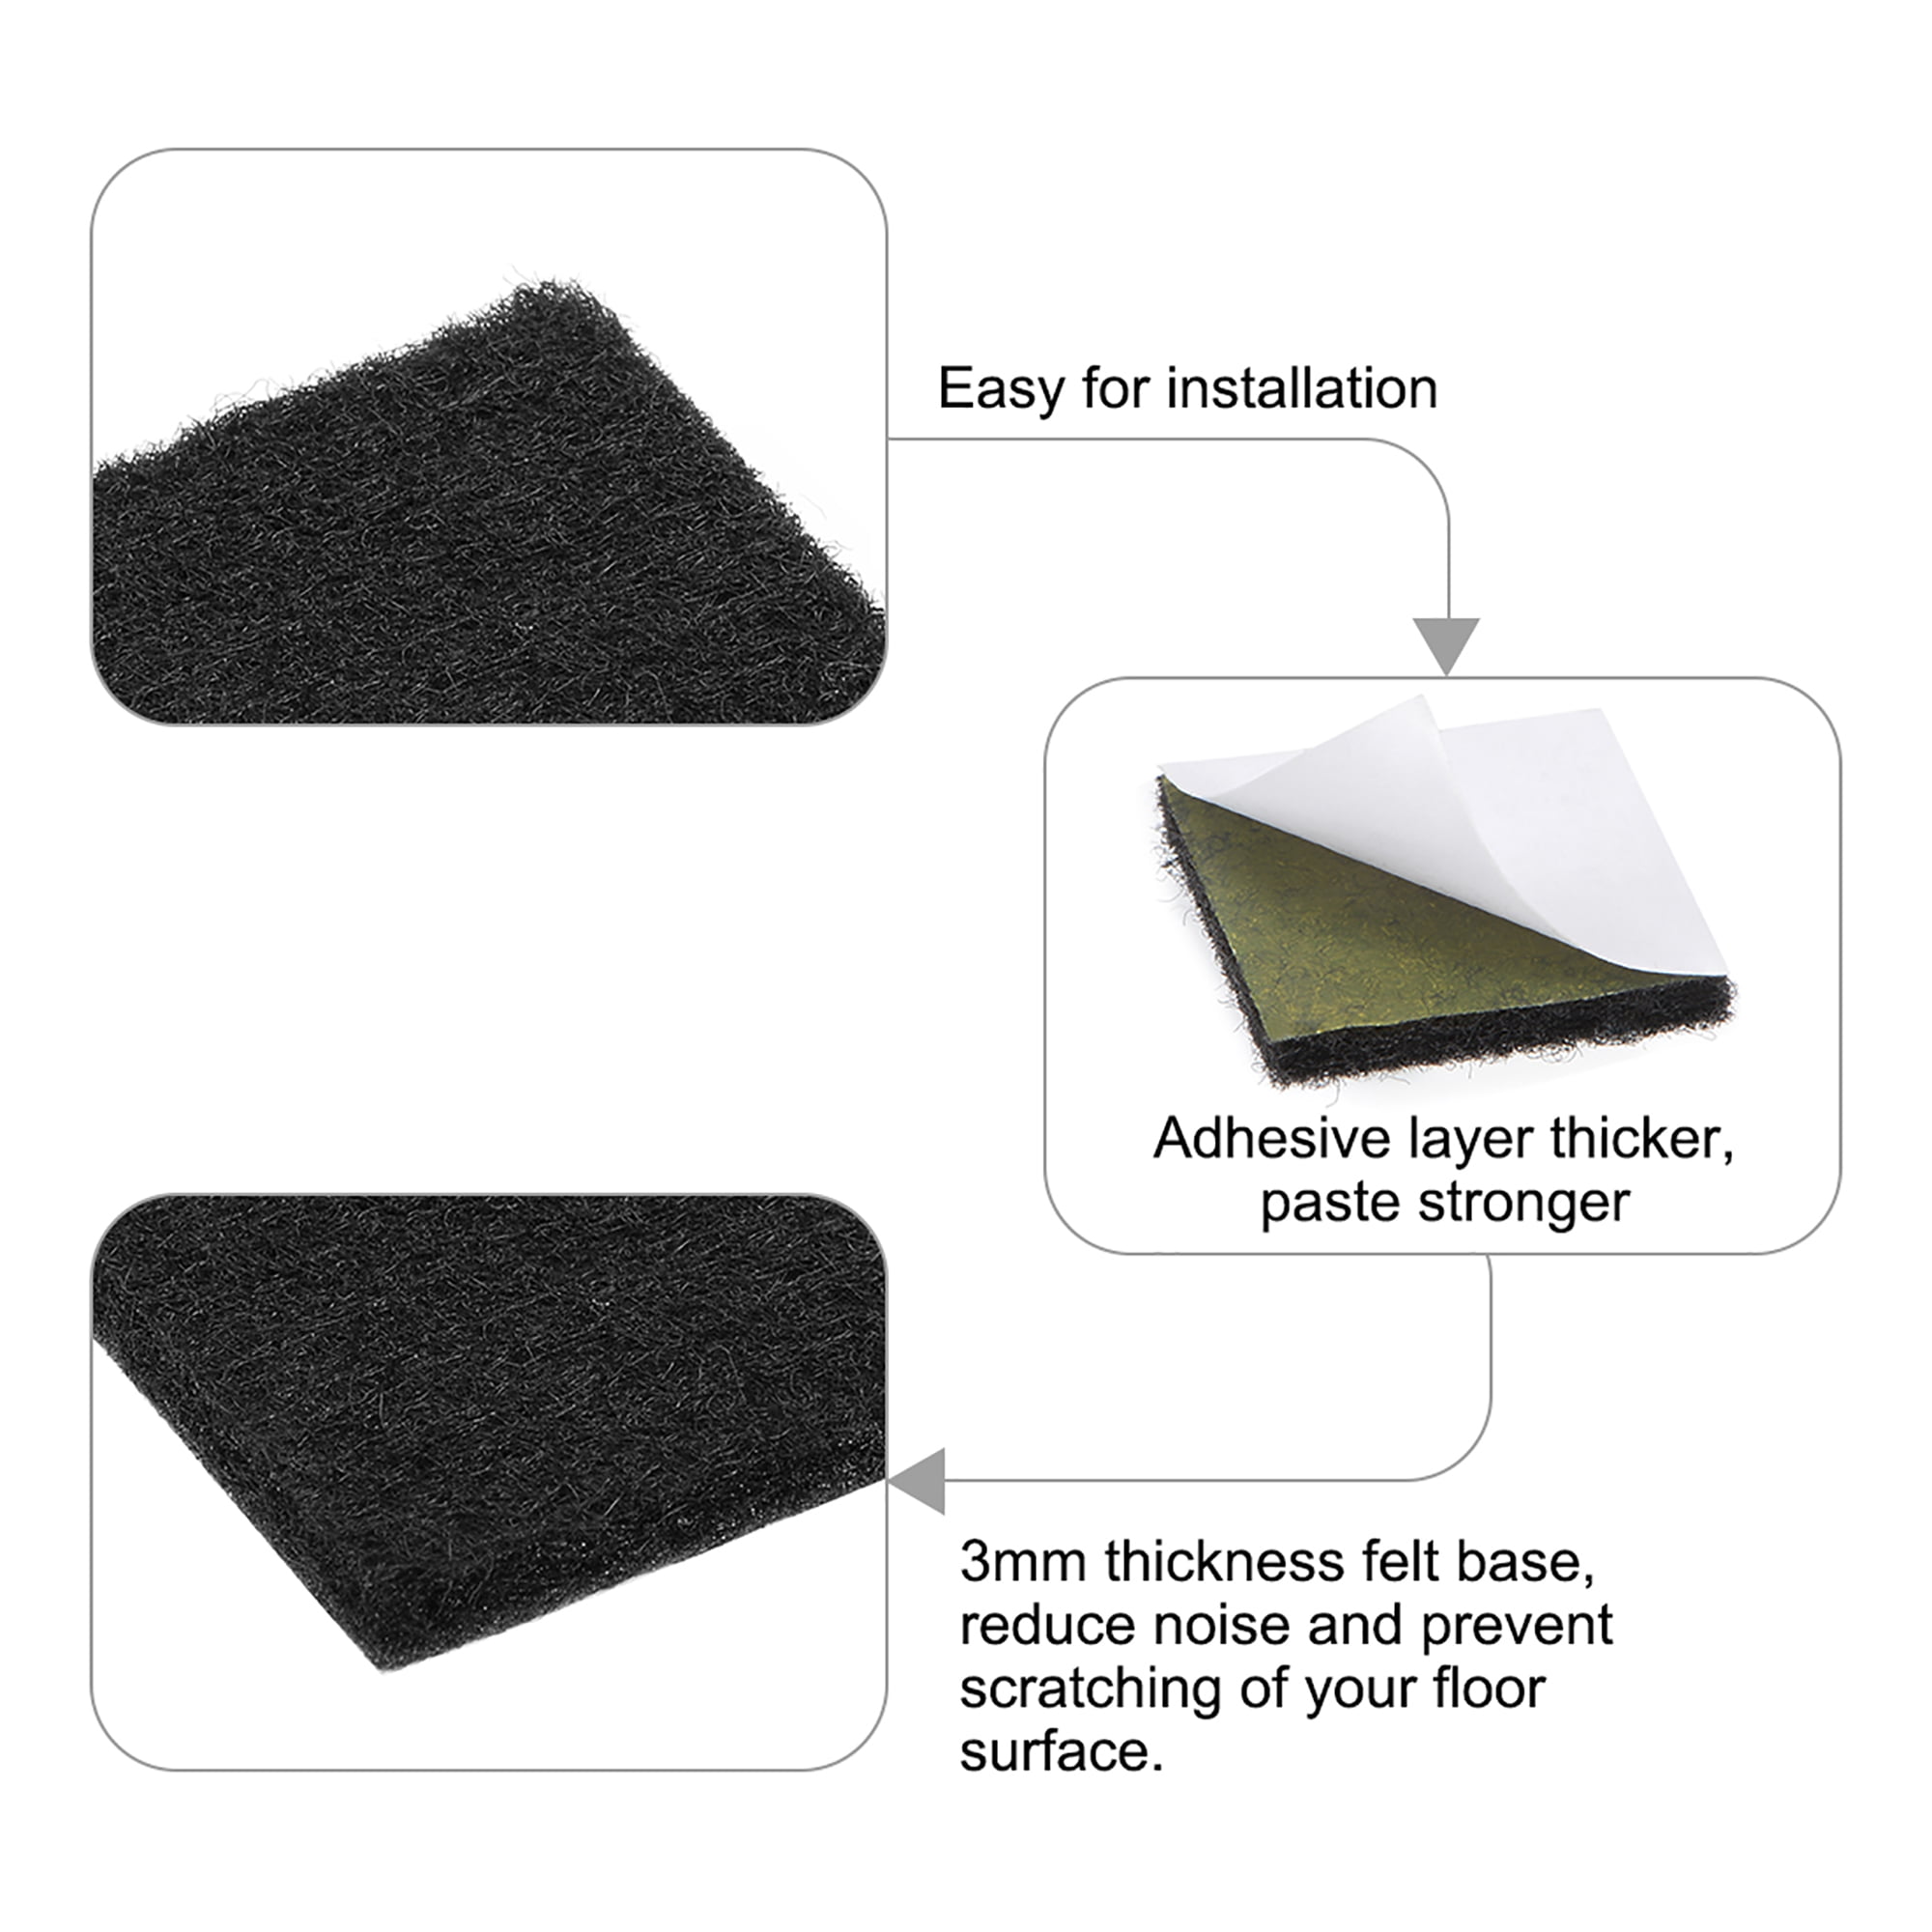 Details about   Furniture Pads Adhesive Felt Pads 20mm x 20mm Square 3mm Thick Black 48Pcs 